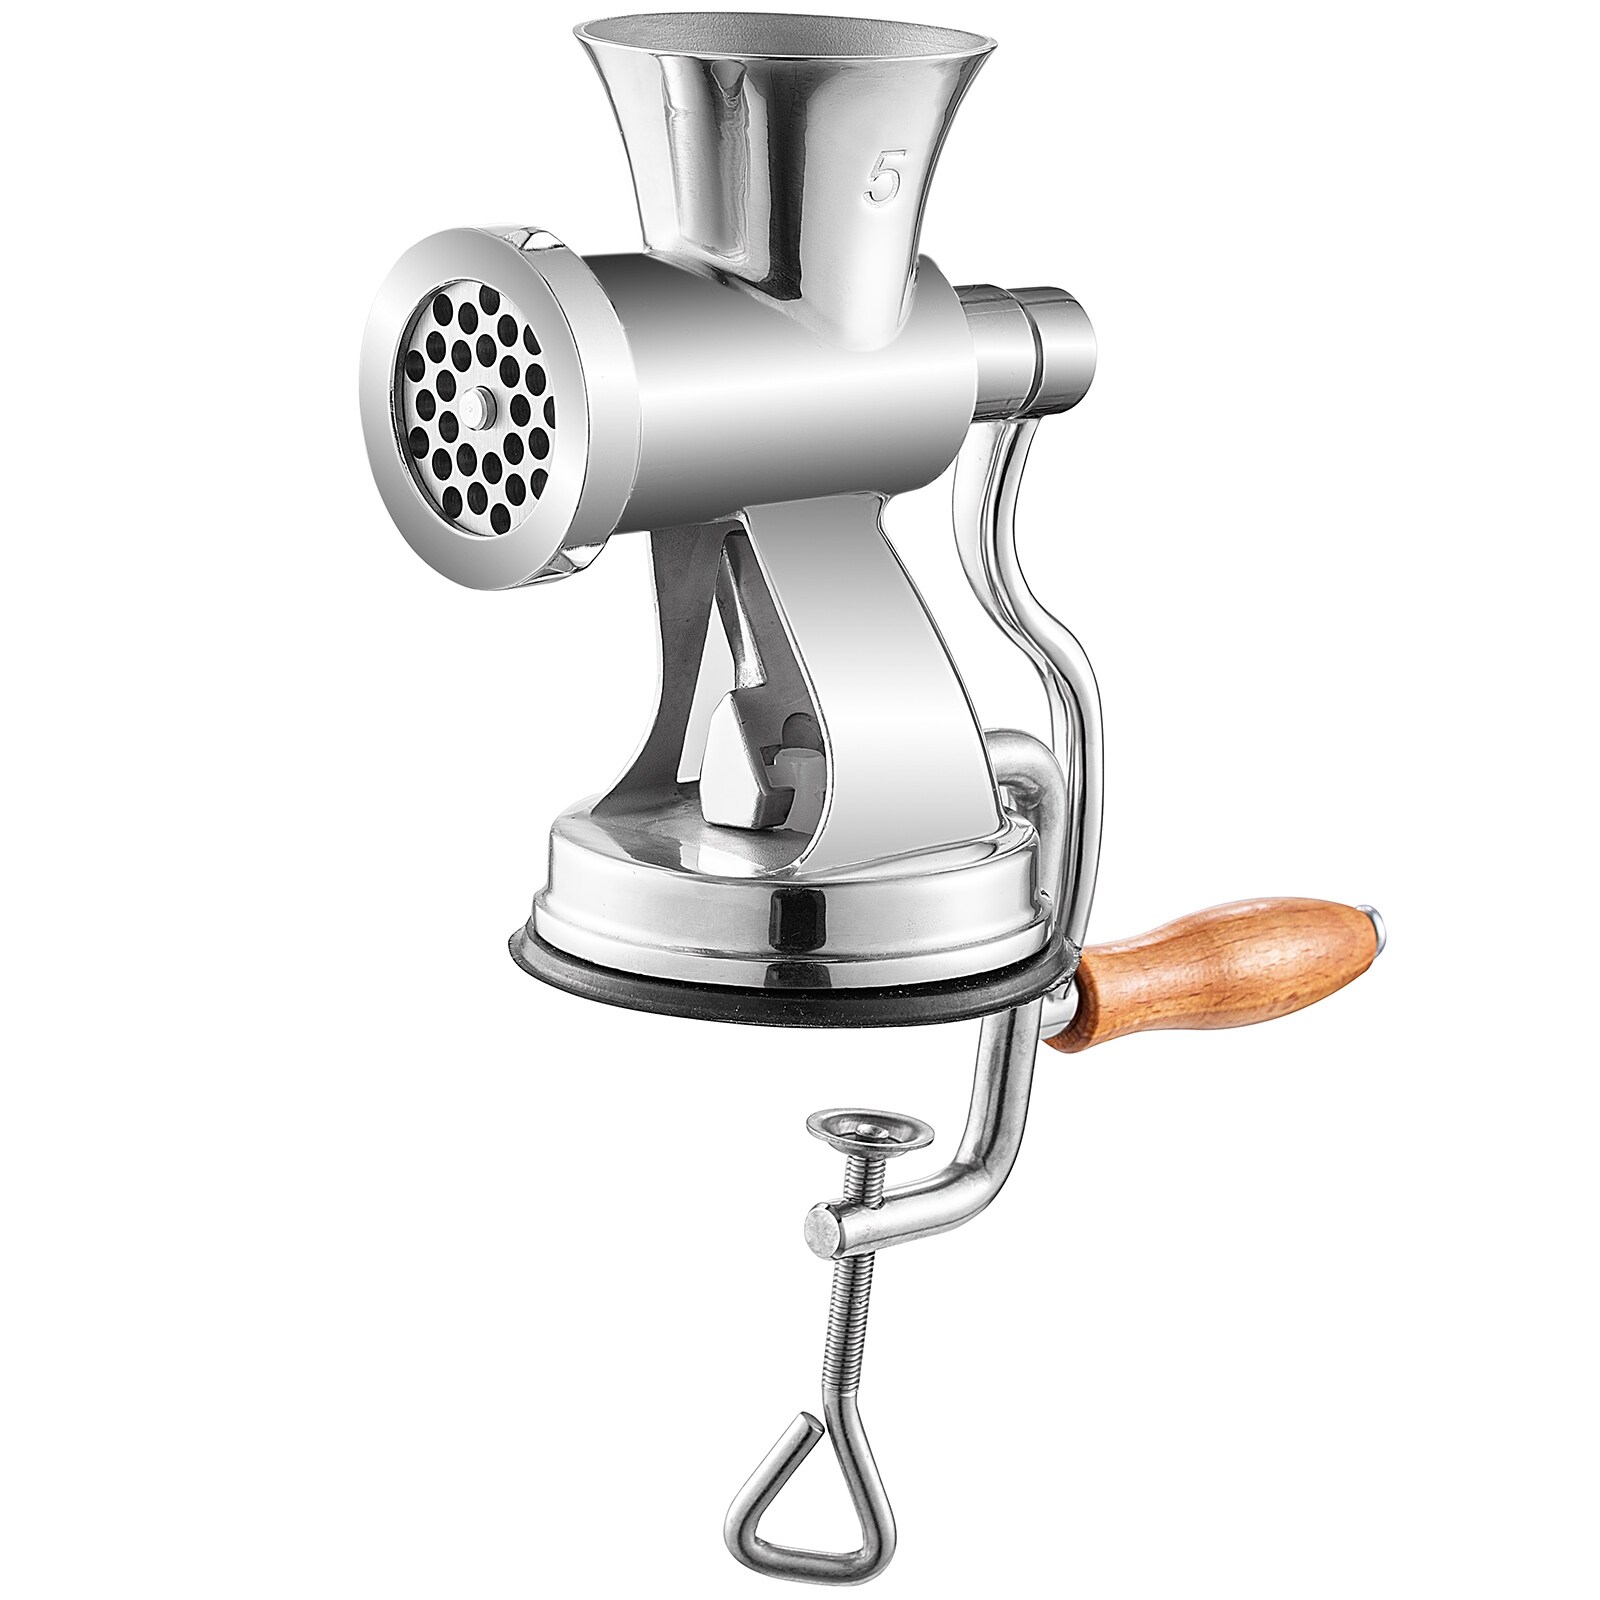 https://ak1.ostkcdn.com/images/products/is/images/direct/19f424d369b719a1a97115c8e00f2734bea6a30b/VEVOR-Meat-Grinder-Manual-304-Stainless-Steel-Hand-Operated-Meat-Grinder-Multifunctional-Crank-Sausage-Maker-Coffee-Powder.jpg